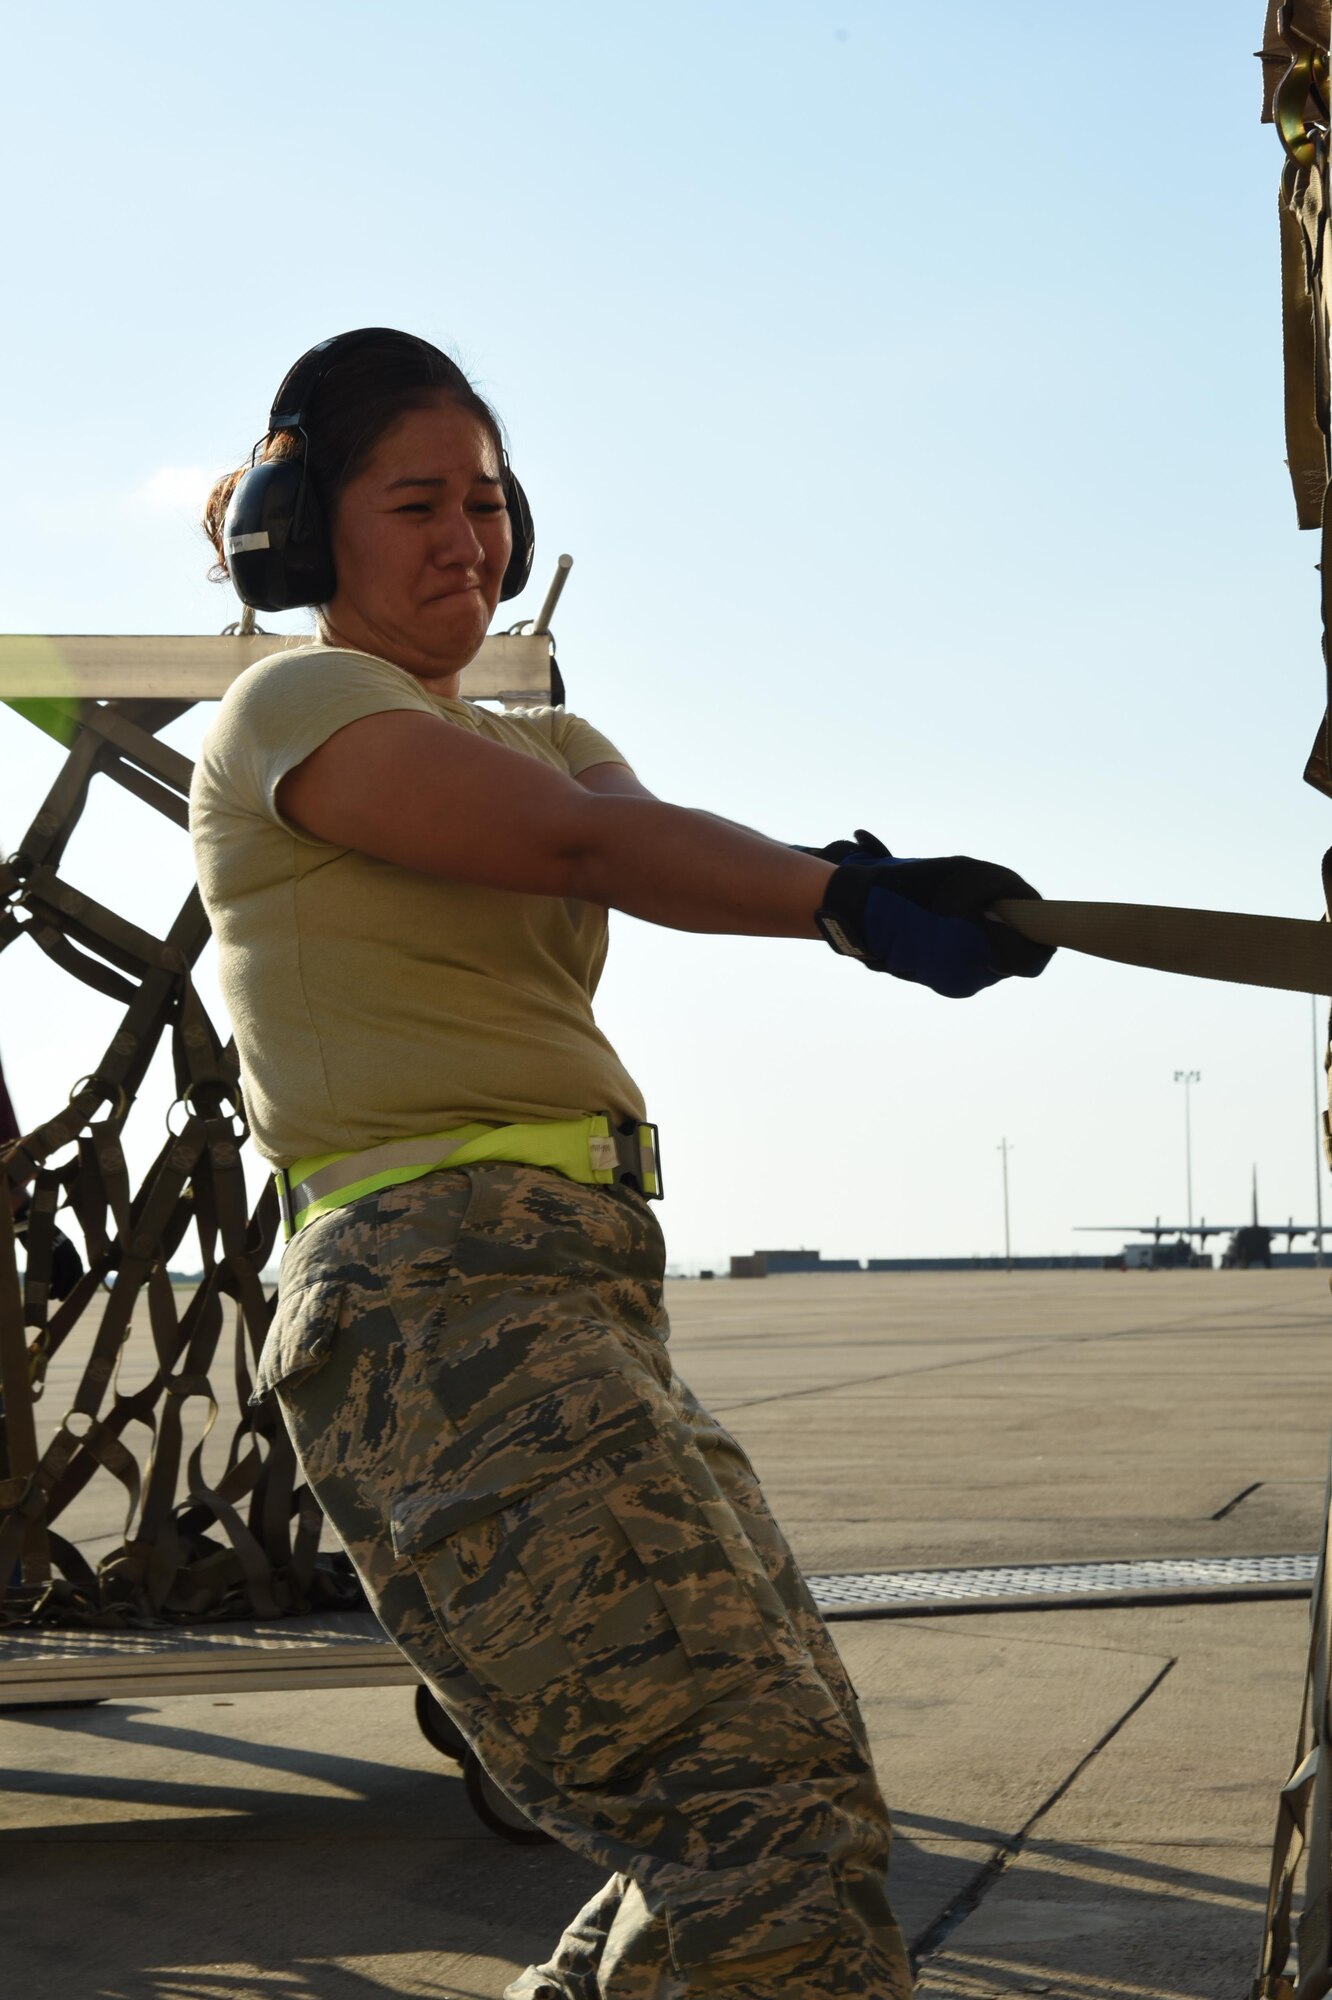 Air Force Master Sgt. Viviana Molina, 73rd Aerial Port Squadron air transportation, secures webbing straps on 90,000 lbs. of American Red Cross supplies August 29, 2017, at Naval Air Station Fort Worth Joint Reserve Base, Texas, in support of Hurricane Harvey relief efforts. Supplies included blankets and cots and were transported as part of the Defense Support of Civil Authority. Department of Defense provides medium and heavy lift rotary wing assets, along with ground transportation, to move personnel, commodities and equipment within Texas. (U.S. Air Force photo by Ms. Julie Briden-Garcia)